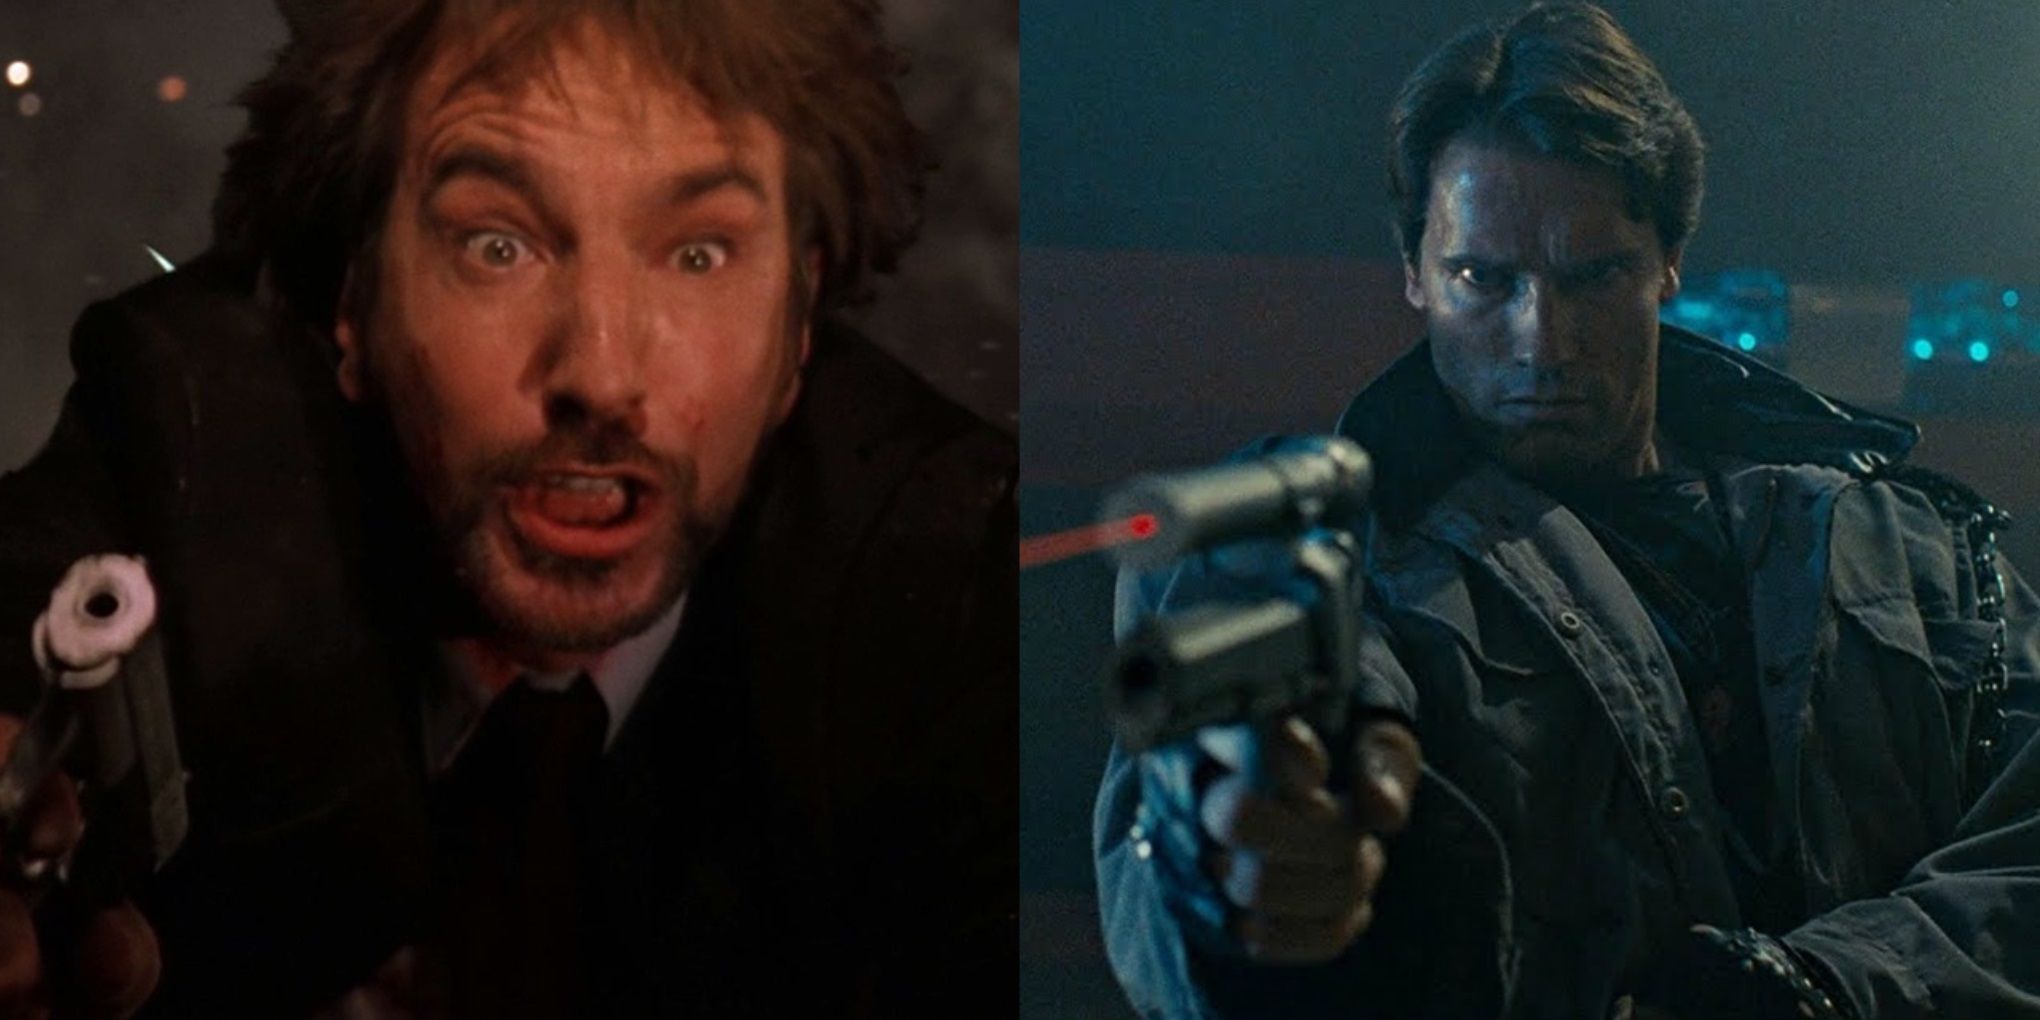 Split image of Hans Gruber in Die Hard and the T-800 in The Terminator